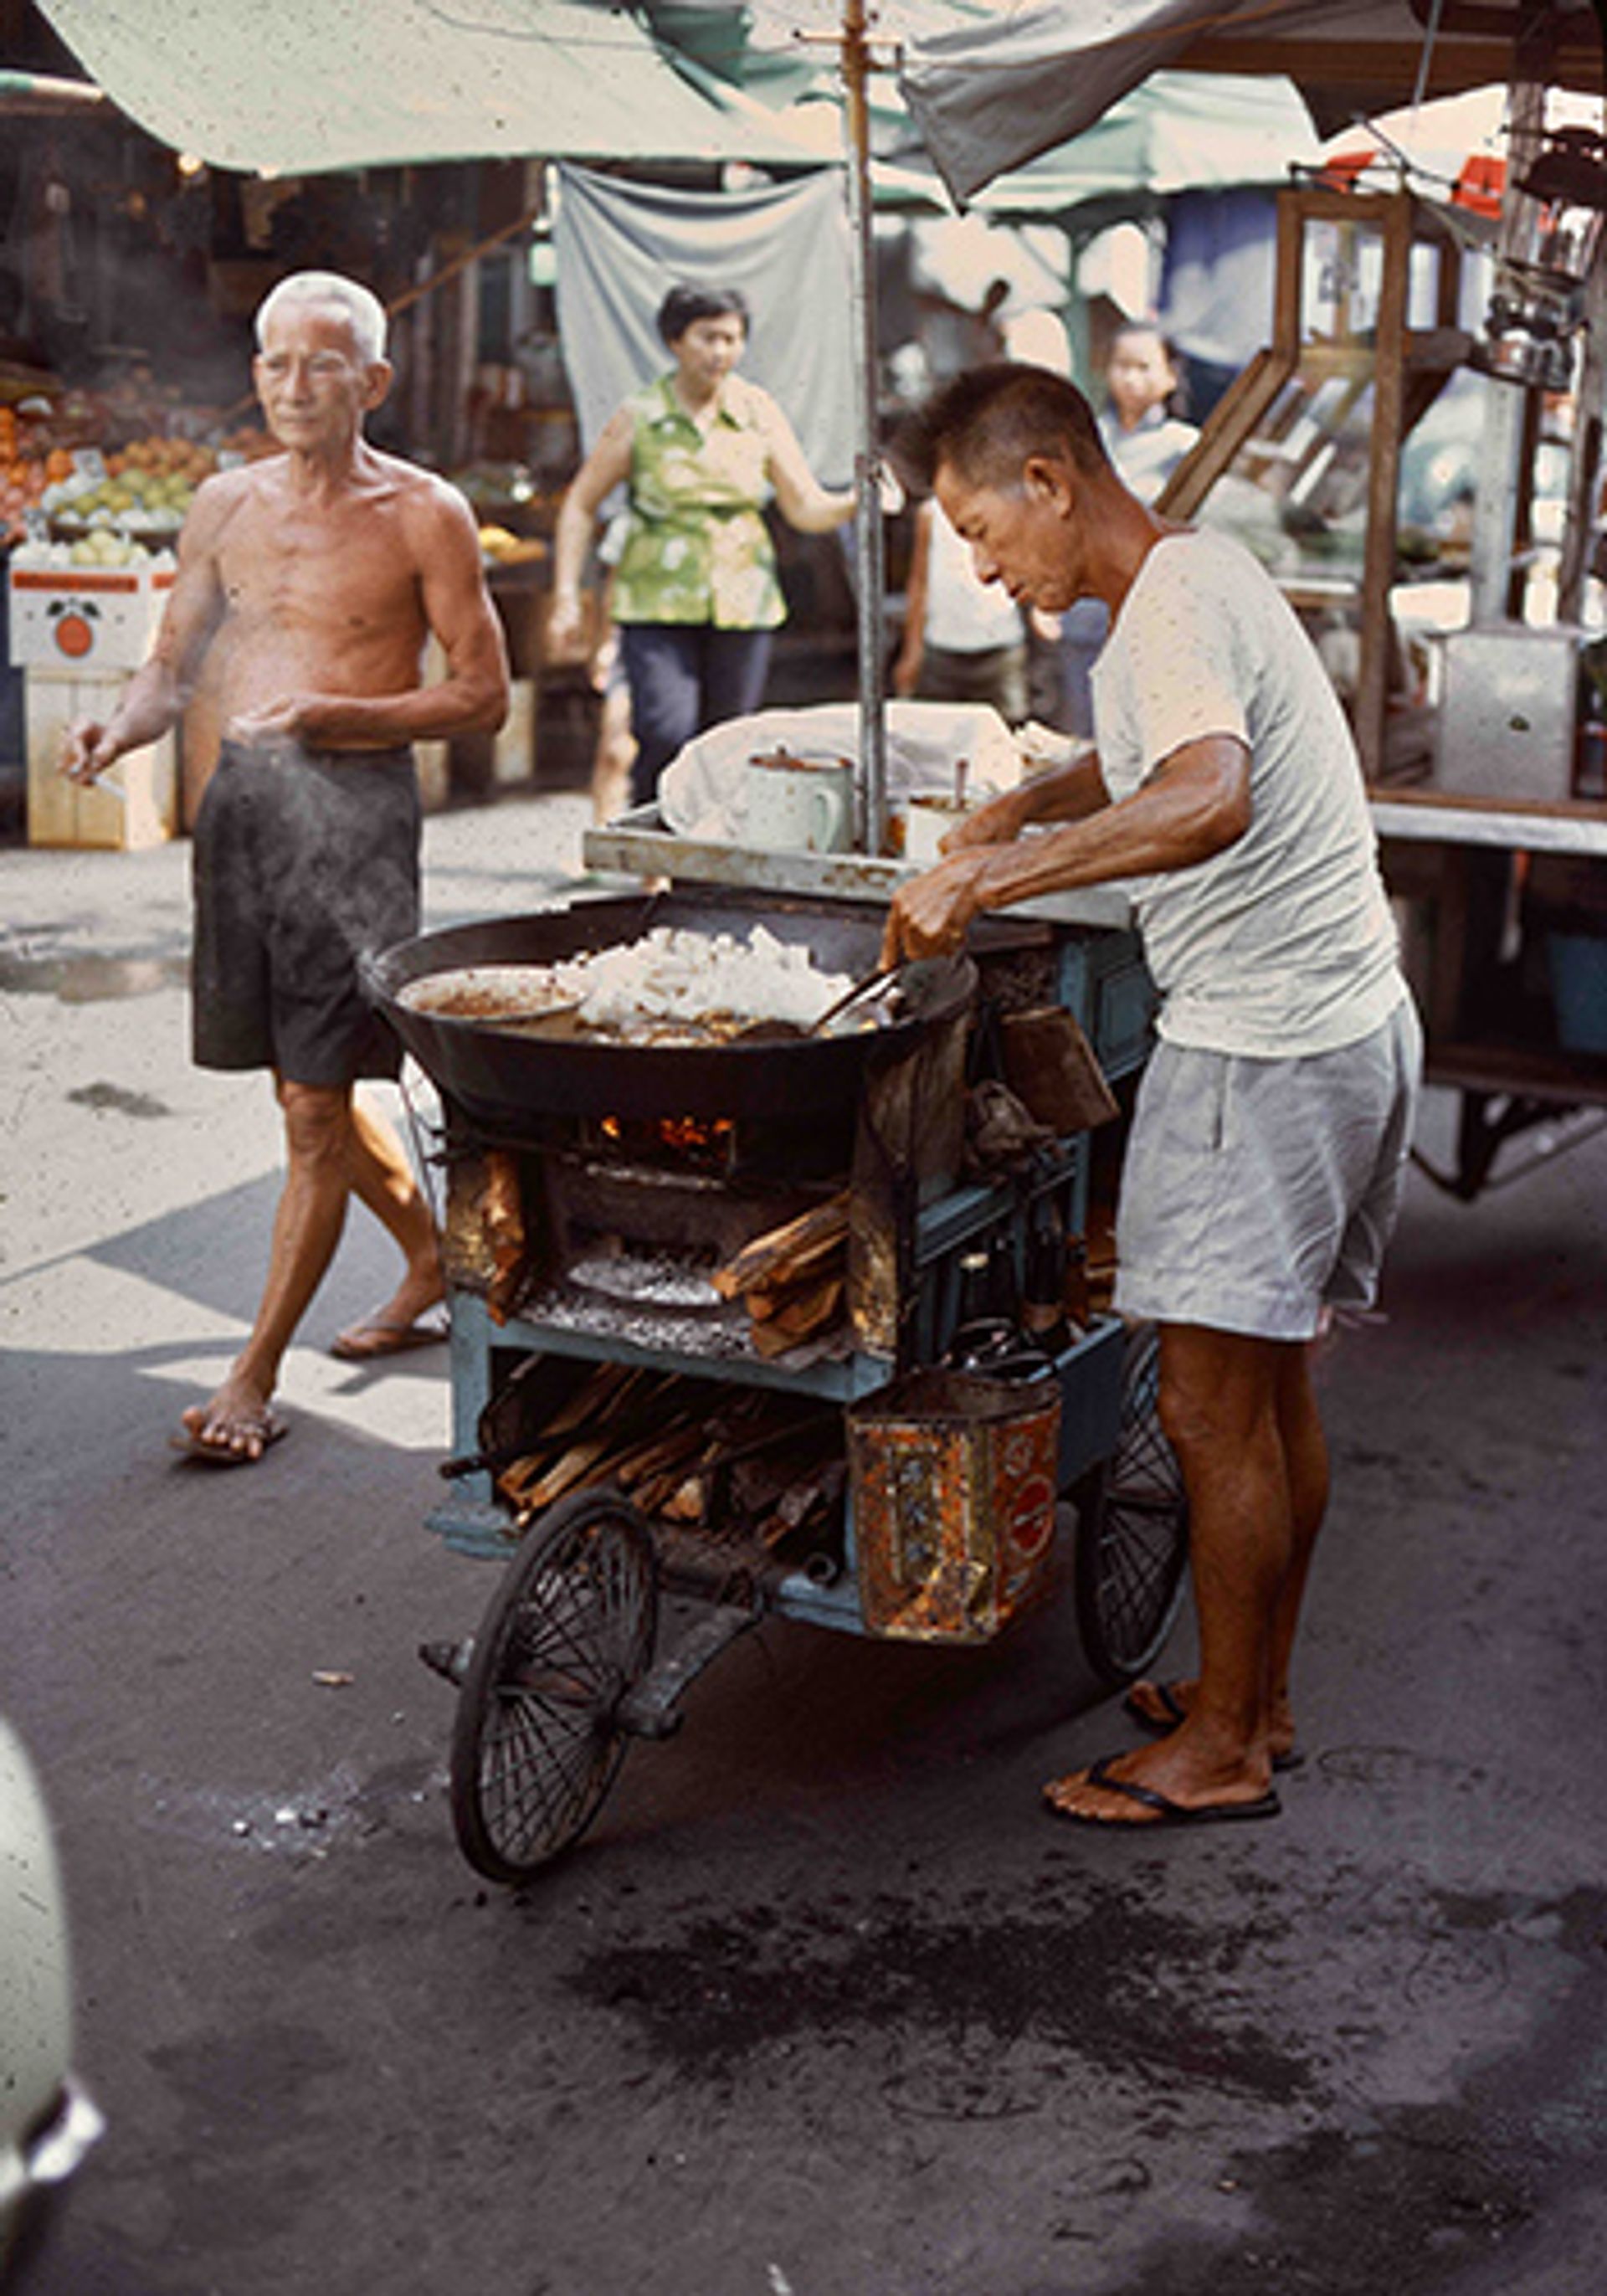 A chye tow kueh (radish cake) seller, cooking over a wood stove fire. Photographed in October 1972 at Chinatown.